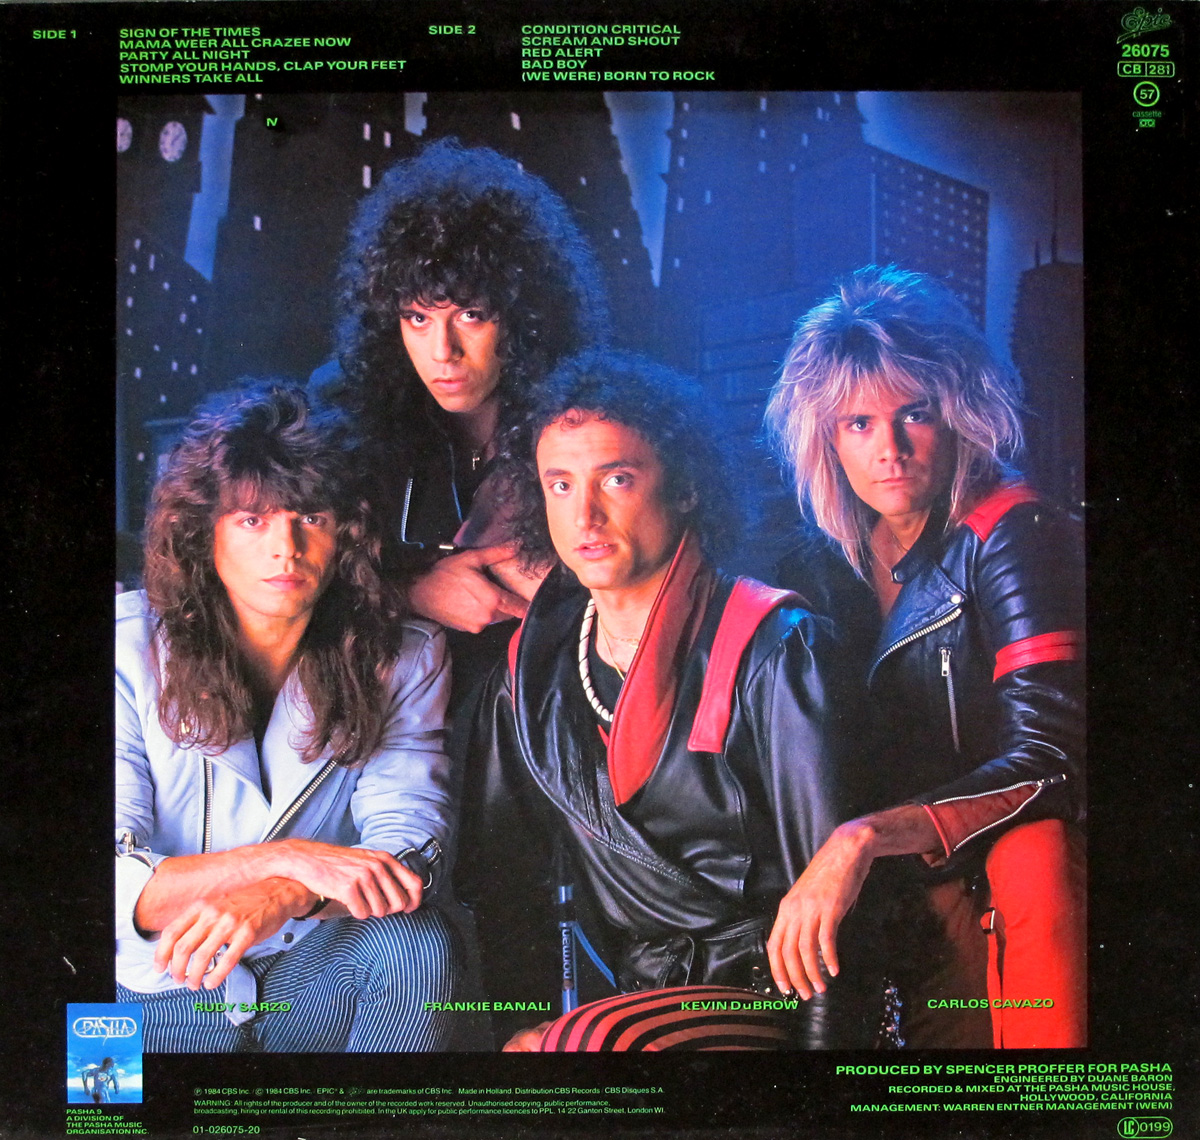 "Condition Critical" back cover The album back cover shows a large group photo with all four band-members of Quiet Riot.